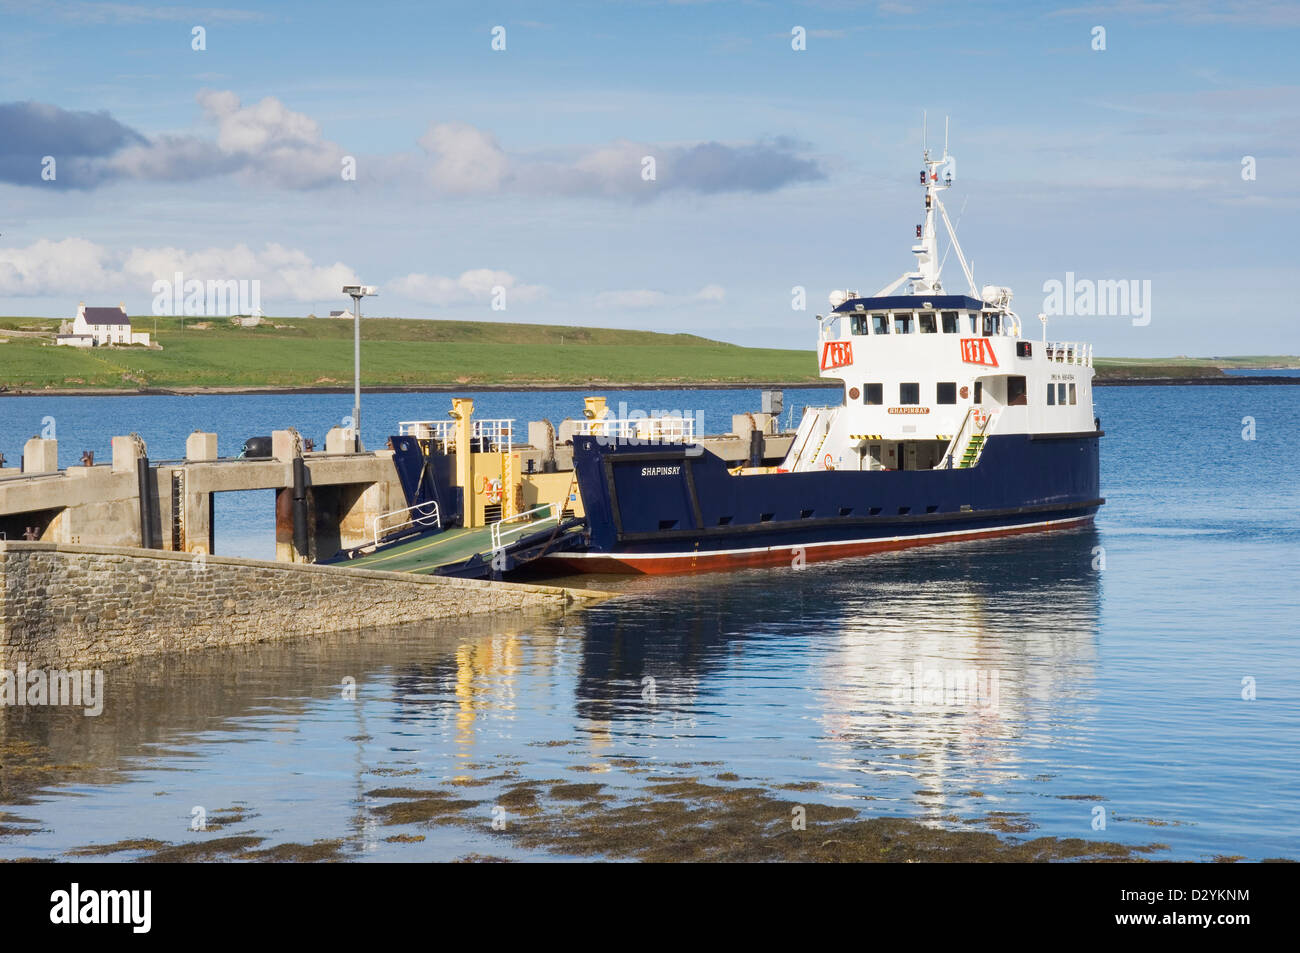 The ferry at the jetty on the island of Shapinsay, Orkney Islands, Scotland. Stock Photo